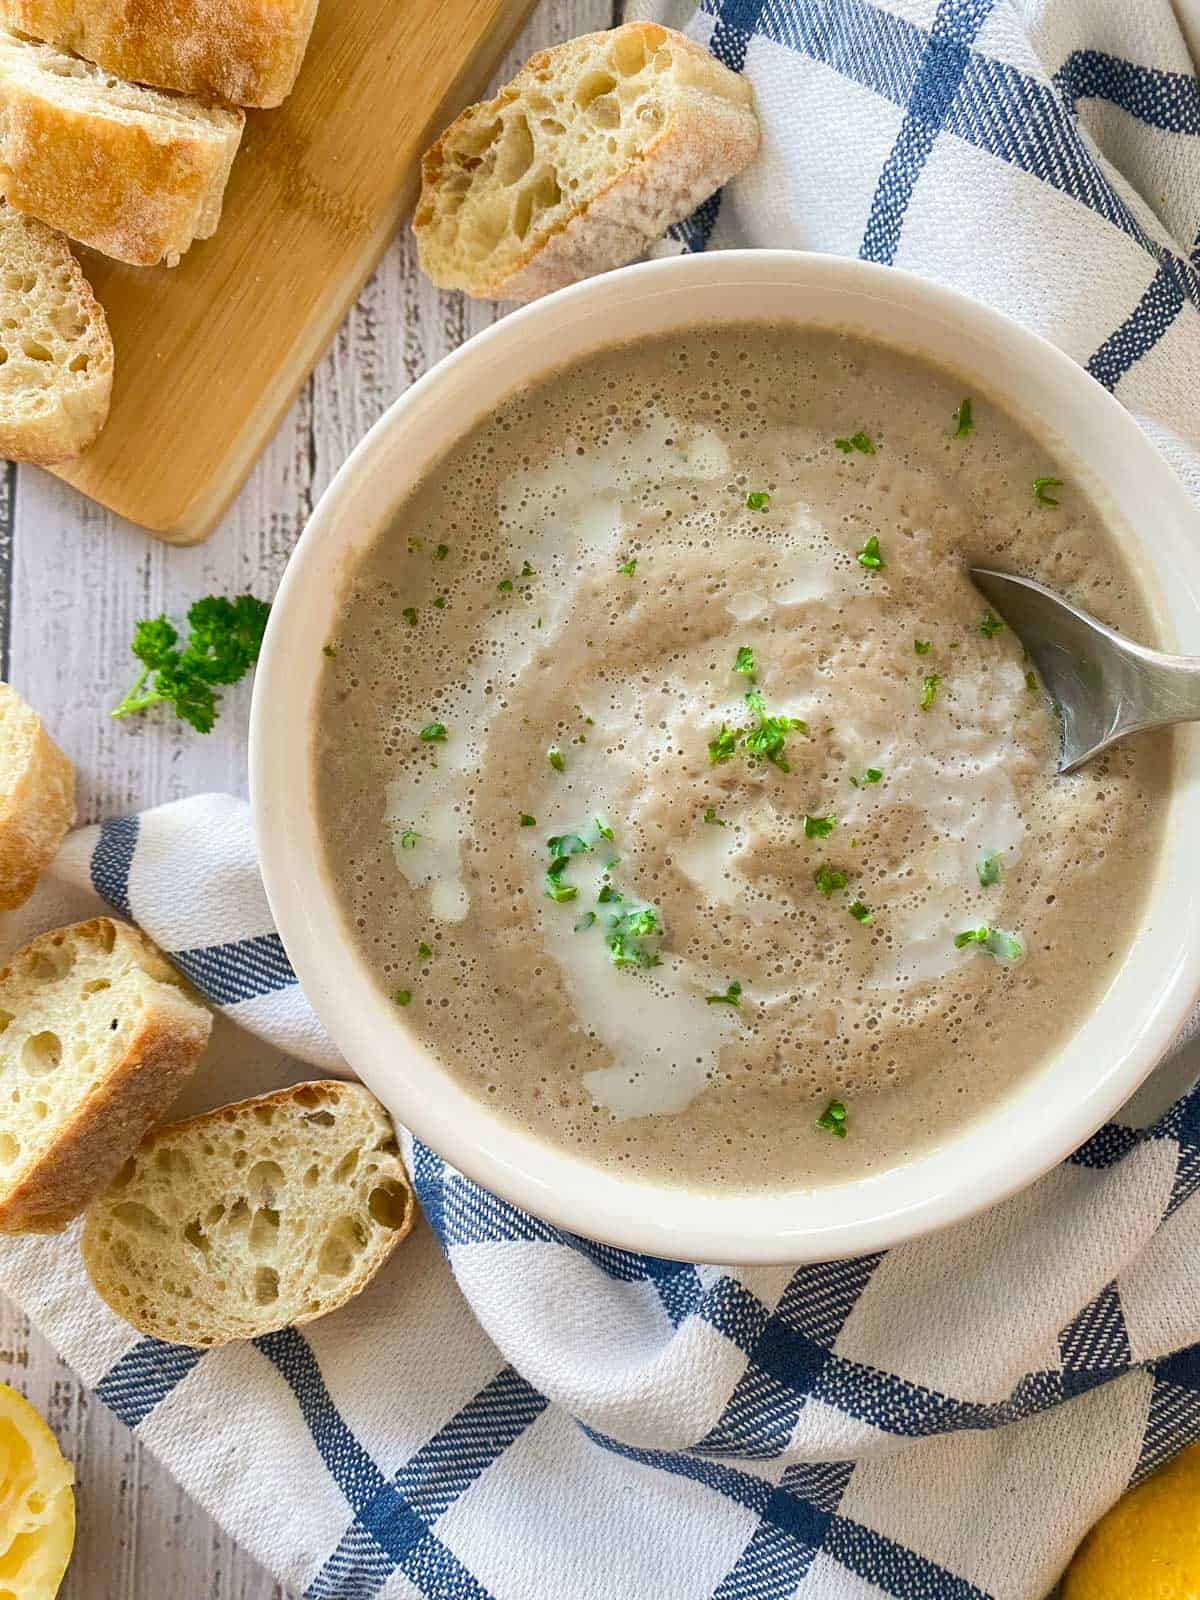 Bowl of mushroom soup with spoon held inside, about to scoop a bite.